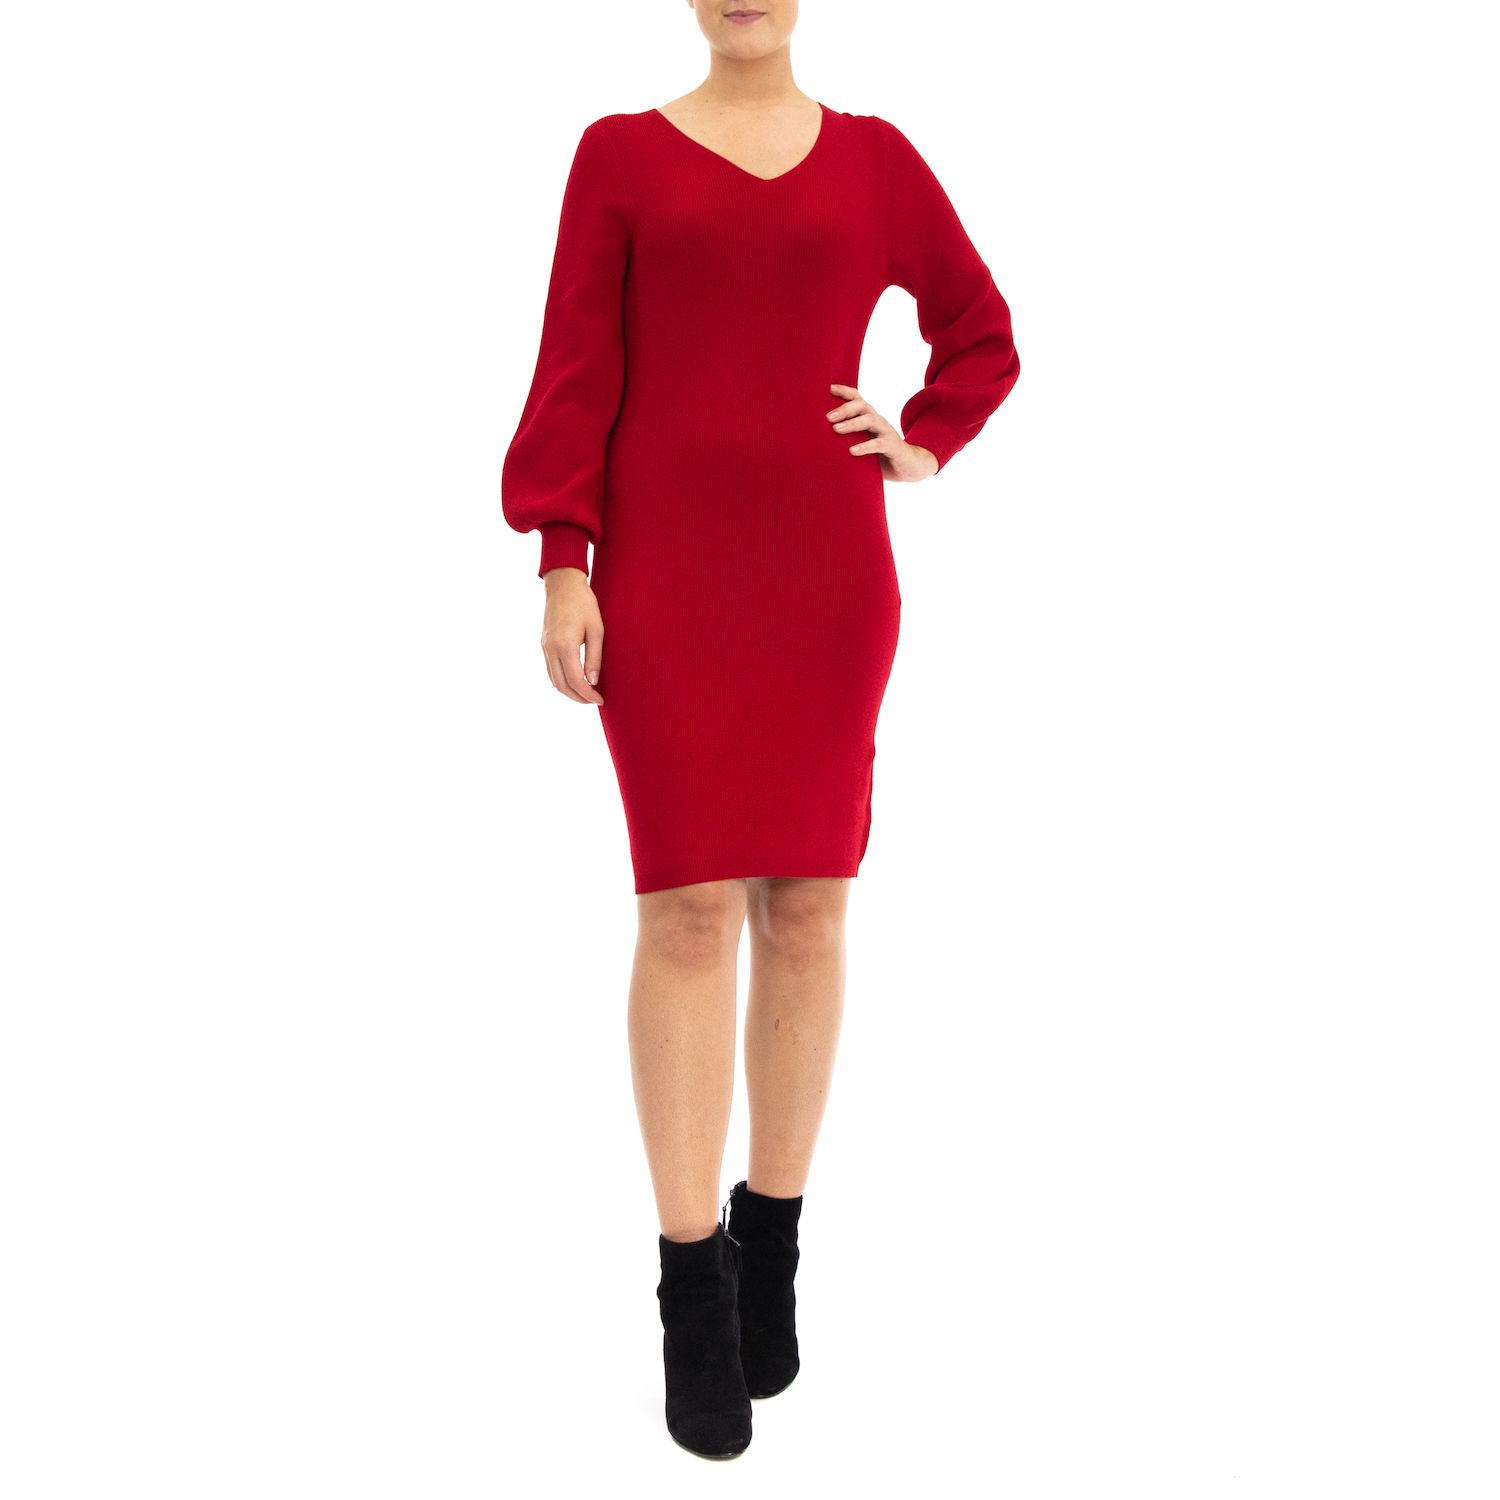 Shop Red Sweater Dresses for Women | Kohl's